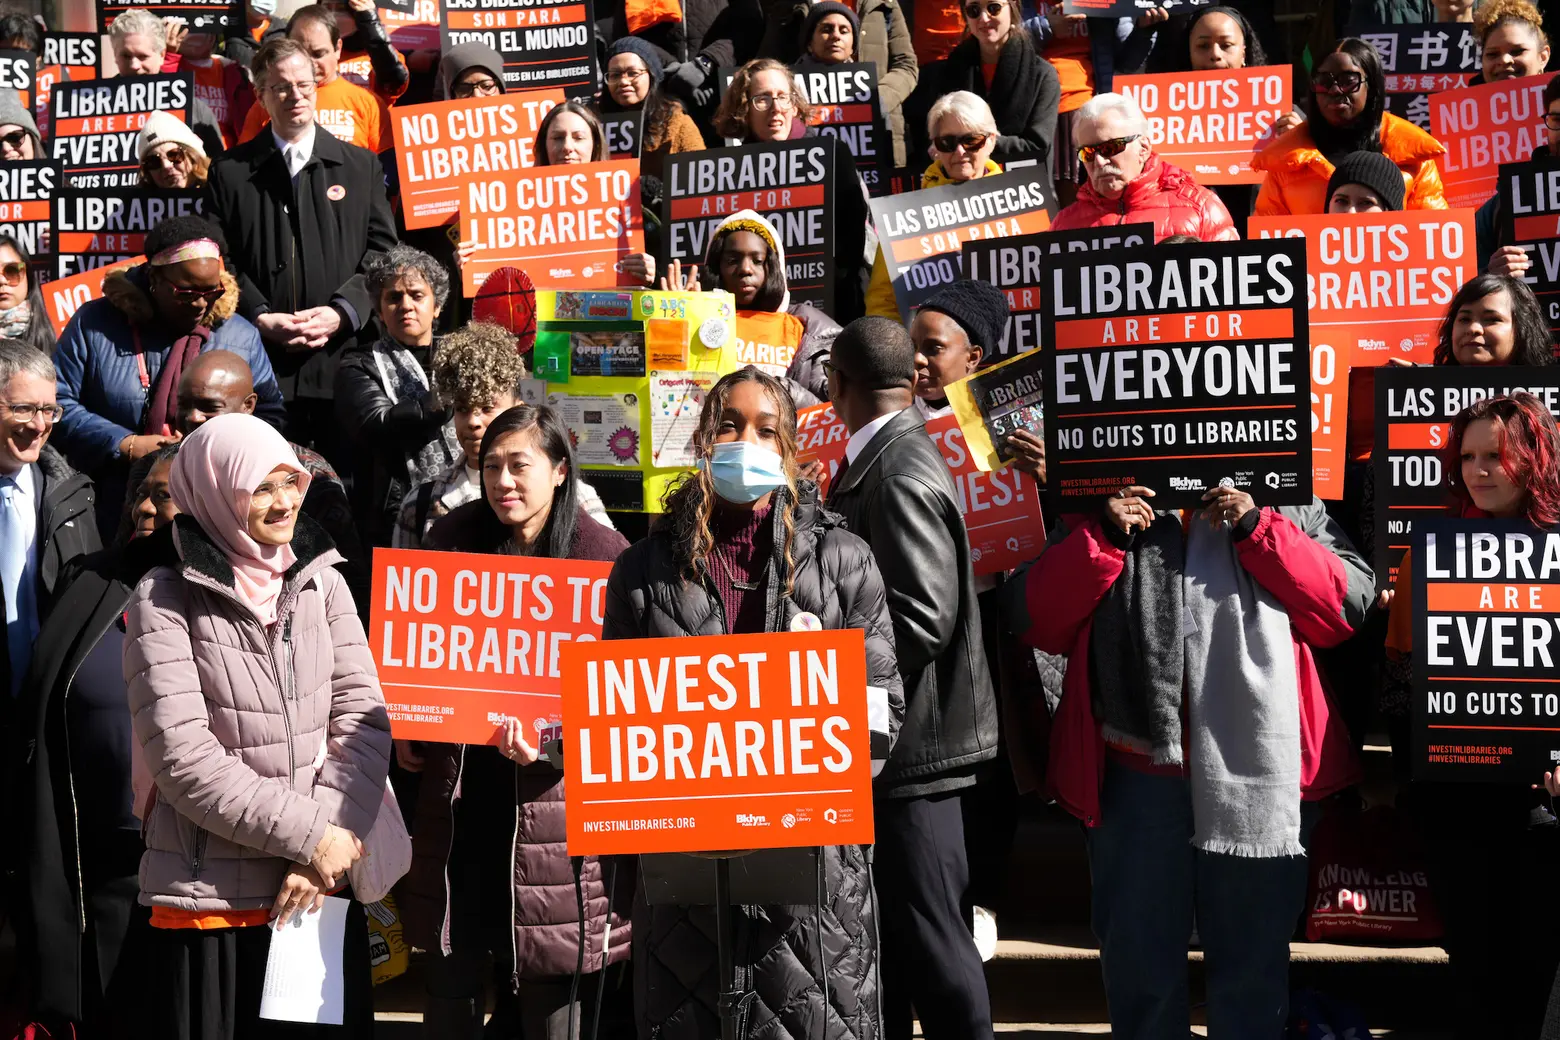 NYC public libraries say $36.2M budget cut will impact service, free programs